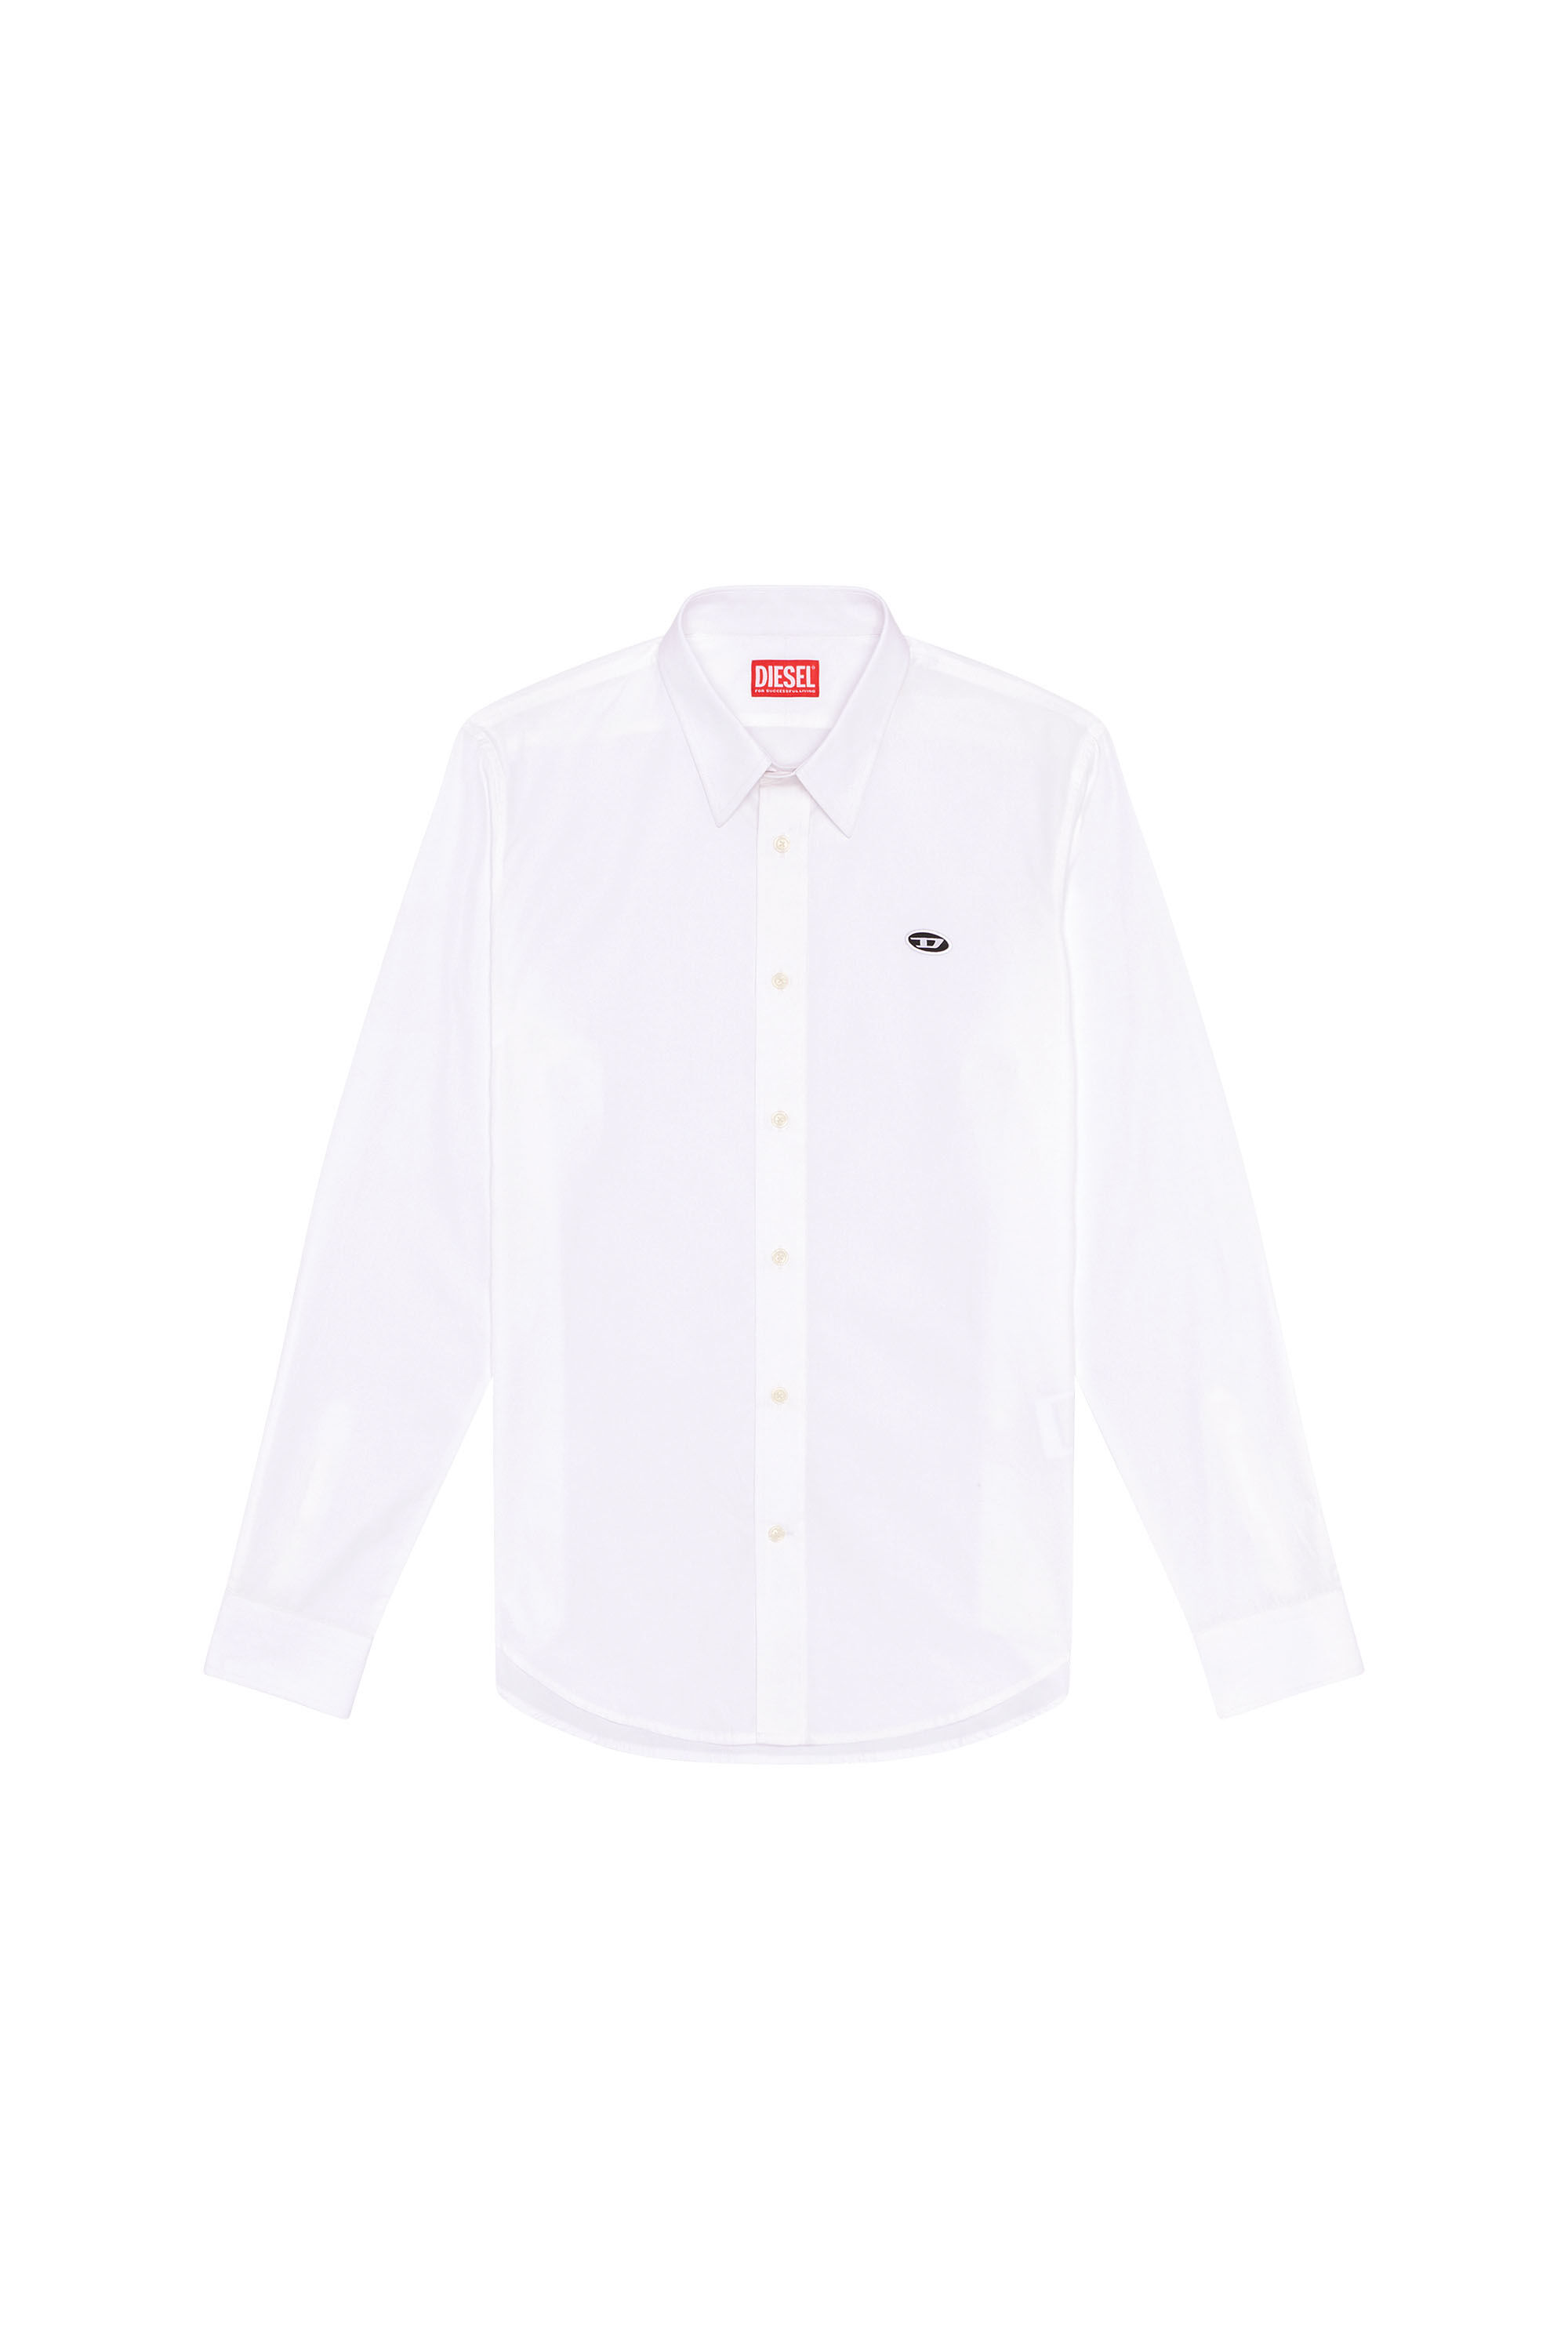 Diesel - S-BENNY-A, Man Shirt with oval D patch in White - Image 2